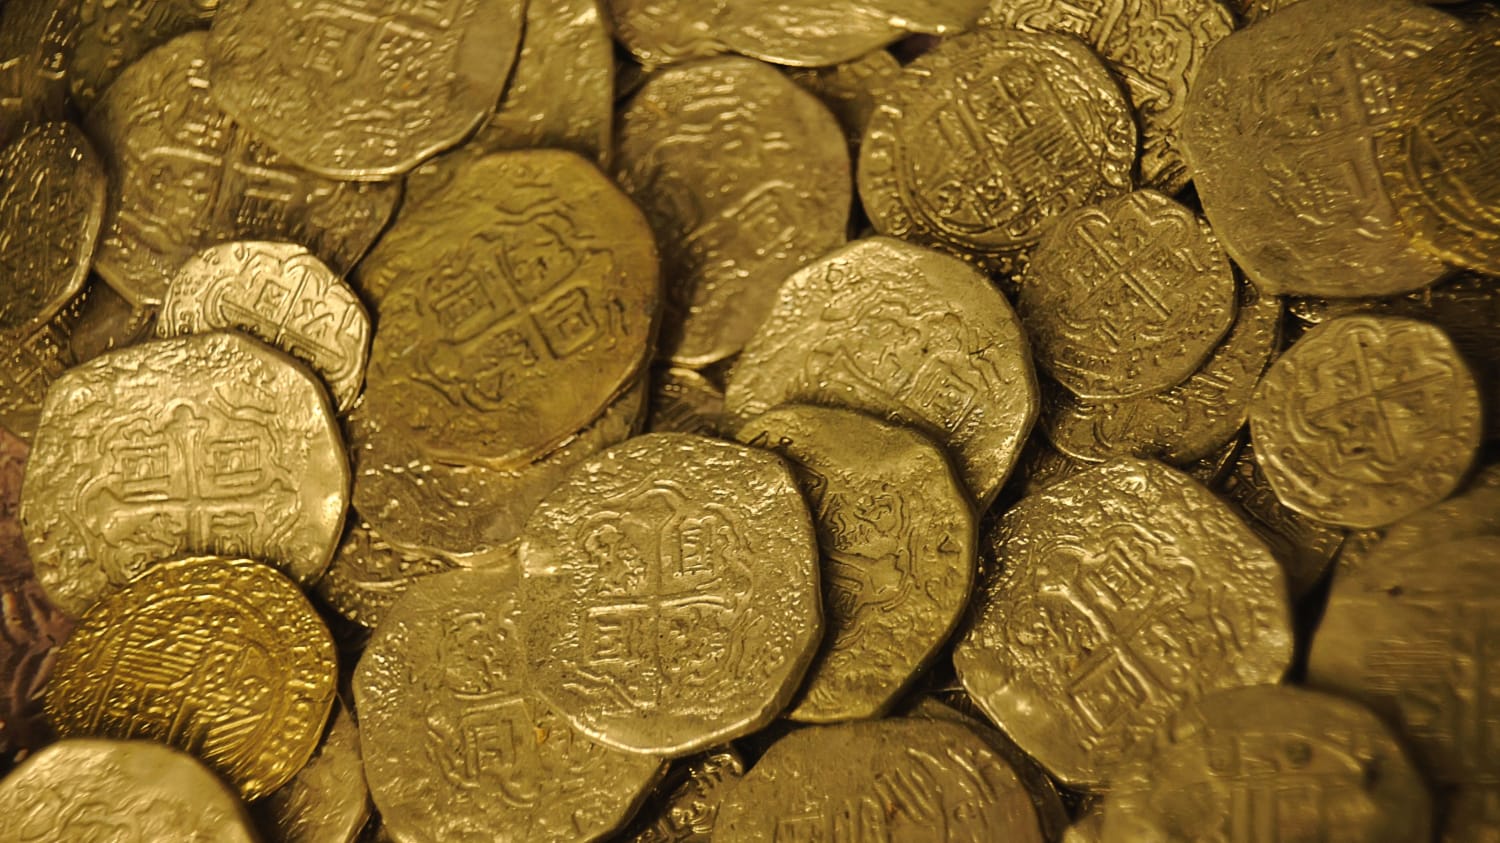 Construction Workers in Italy Uncover a Jar of 5th-Century Gold Coins Potentially Worth Millions